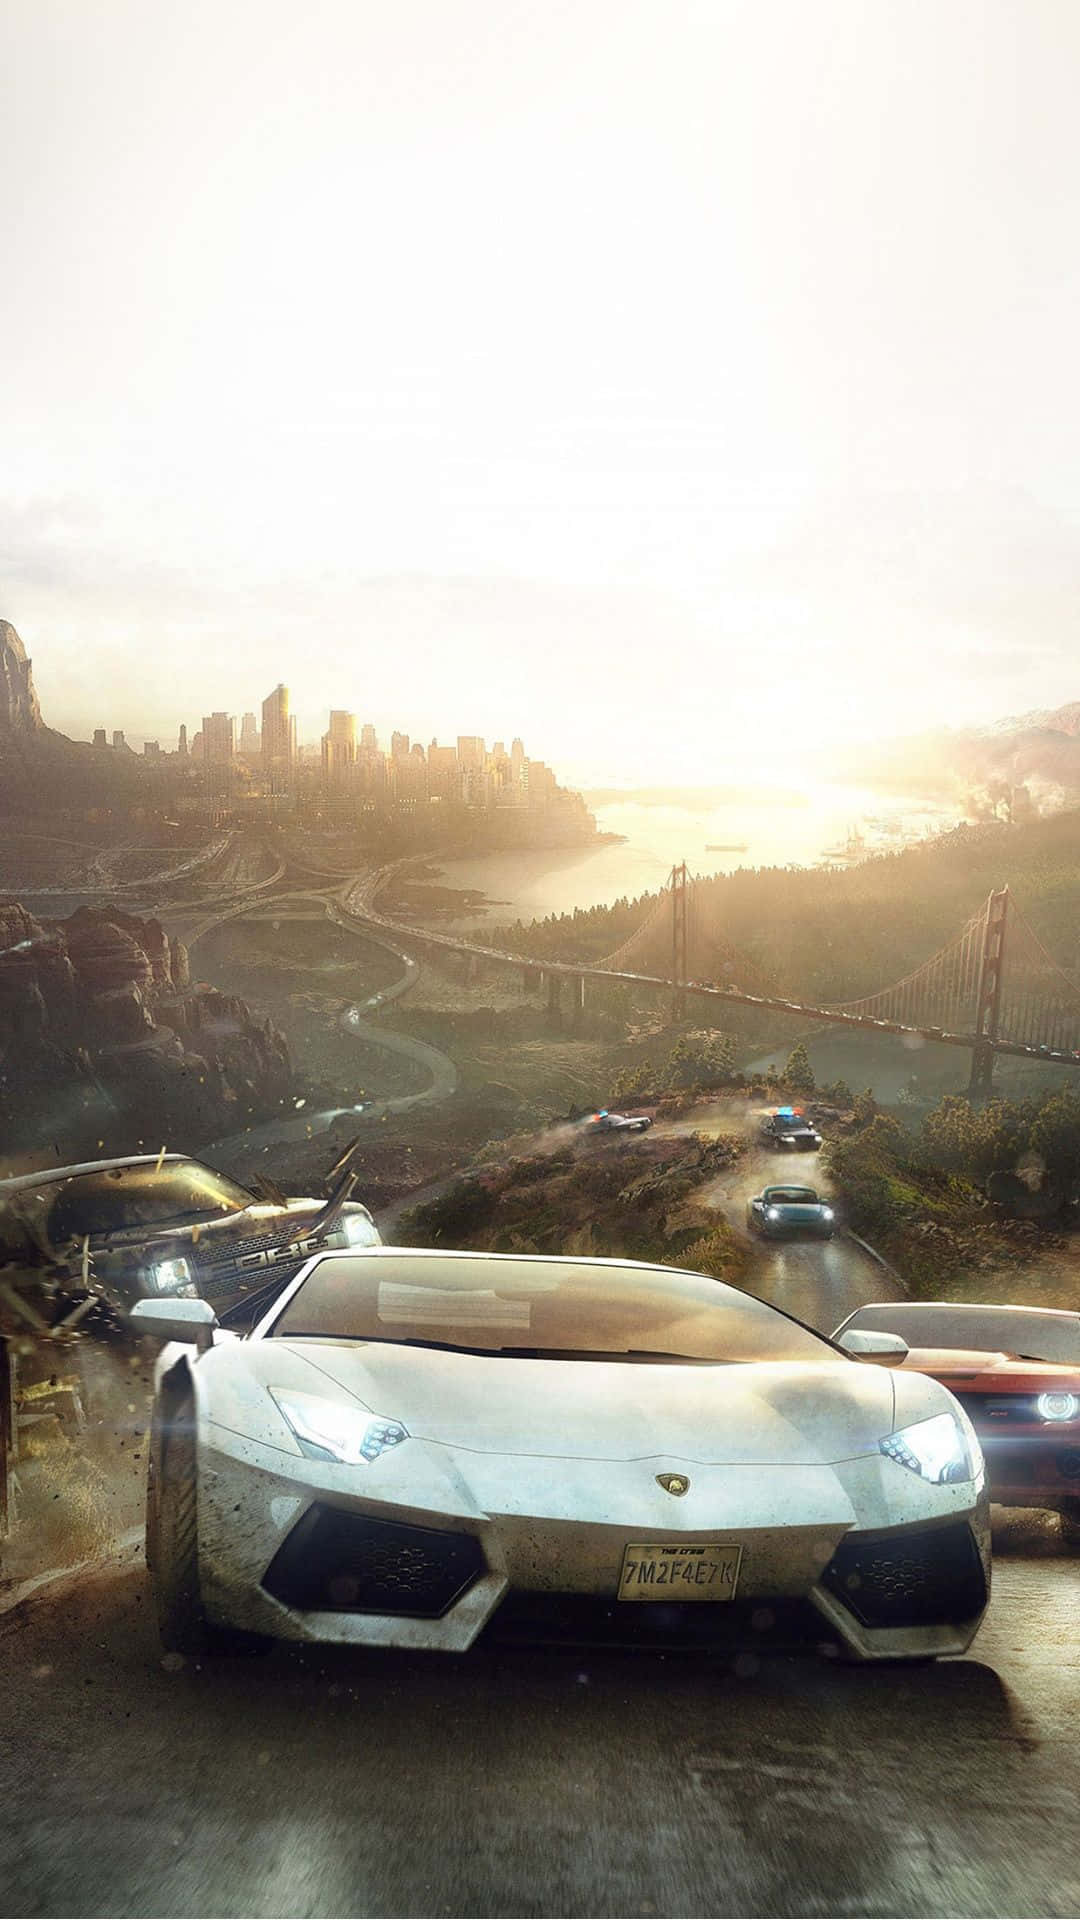 Get ready to experience the Fast And Furious adventure on your Iphone Wallpaper